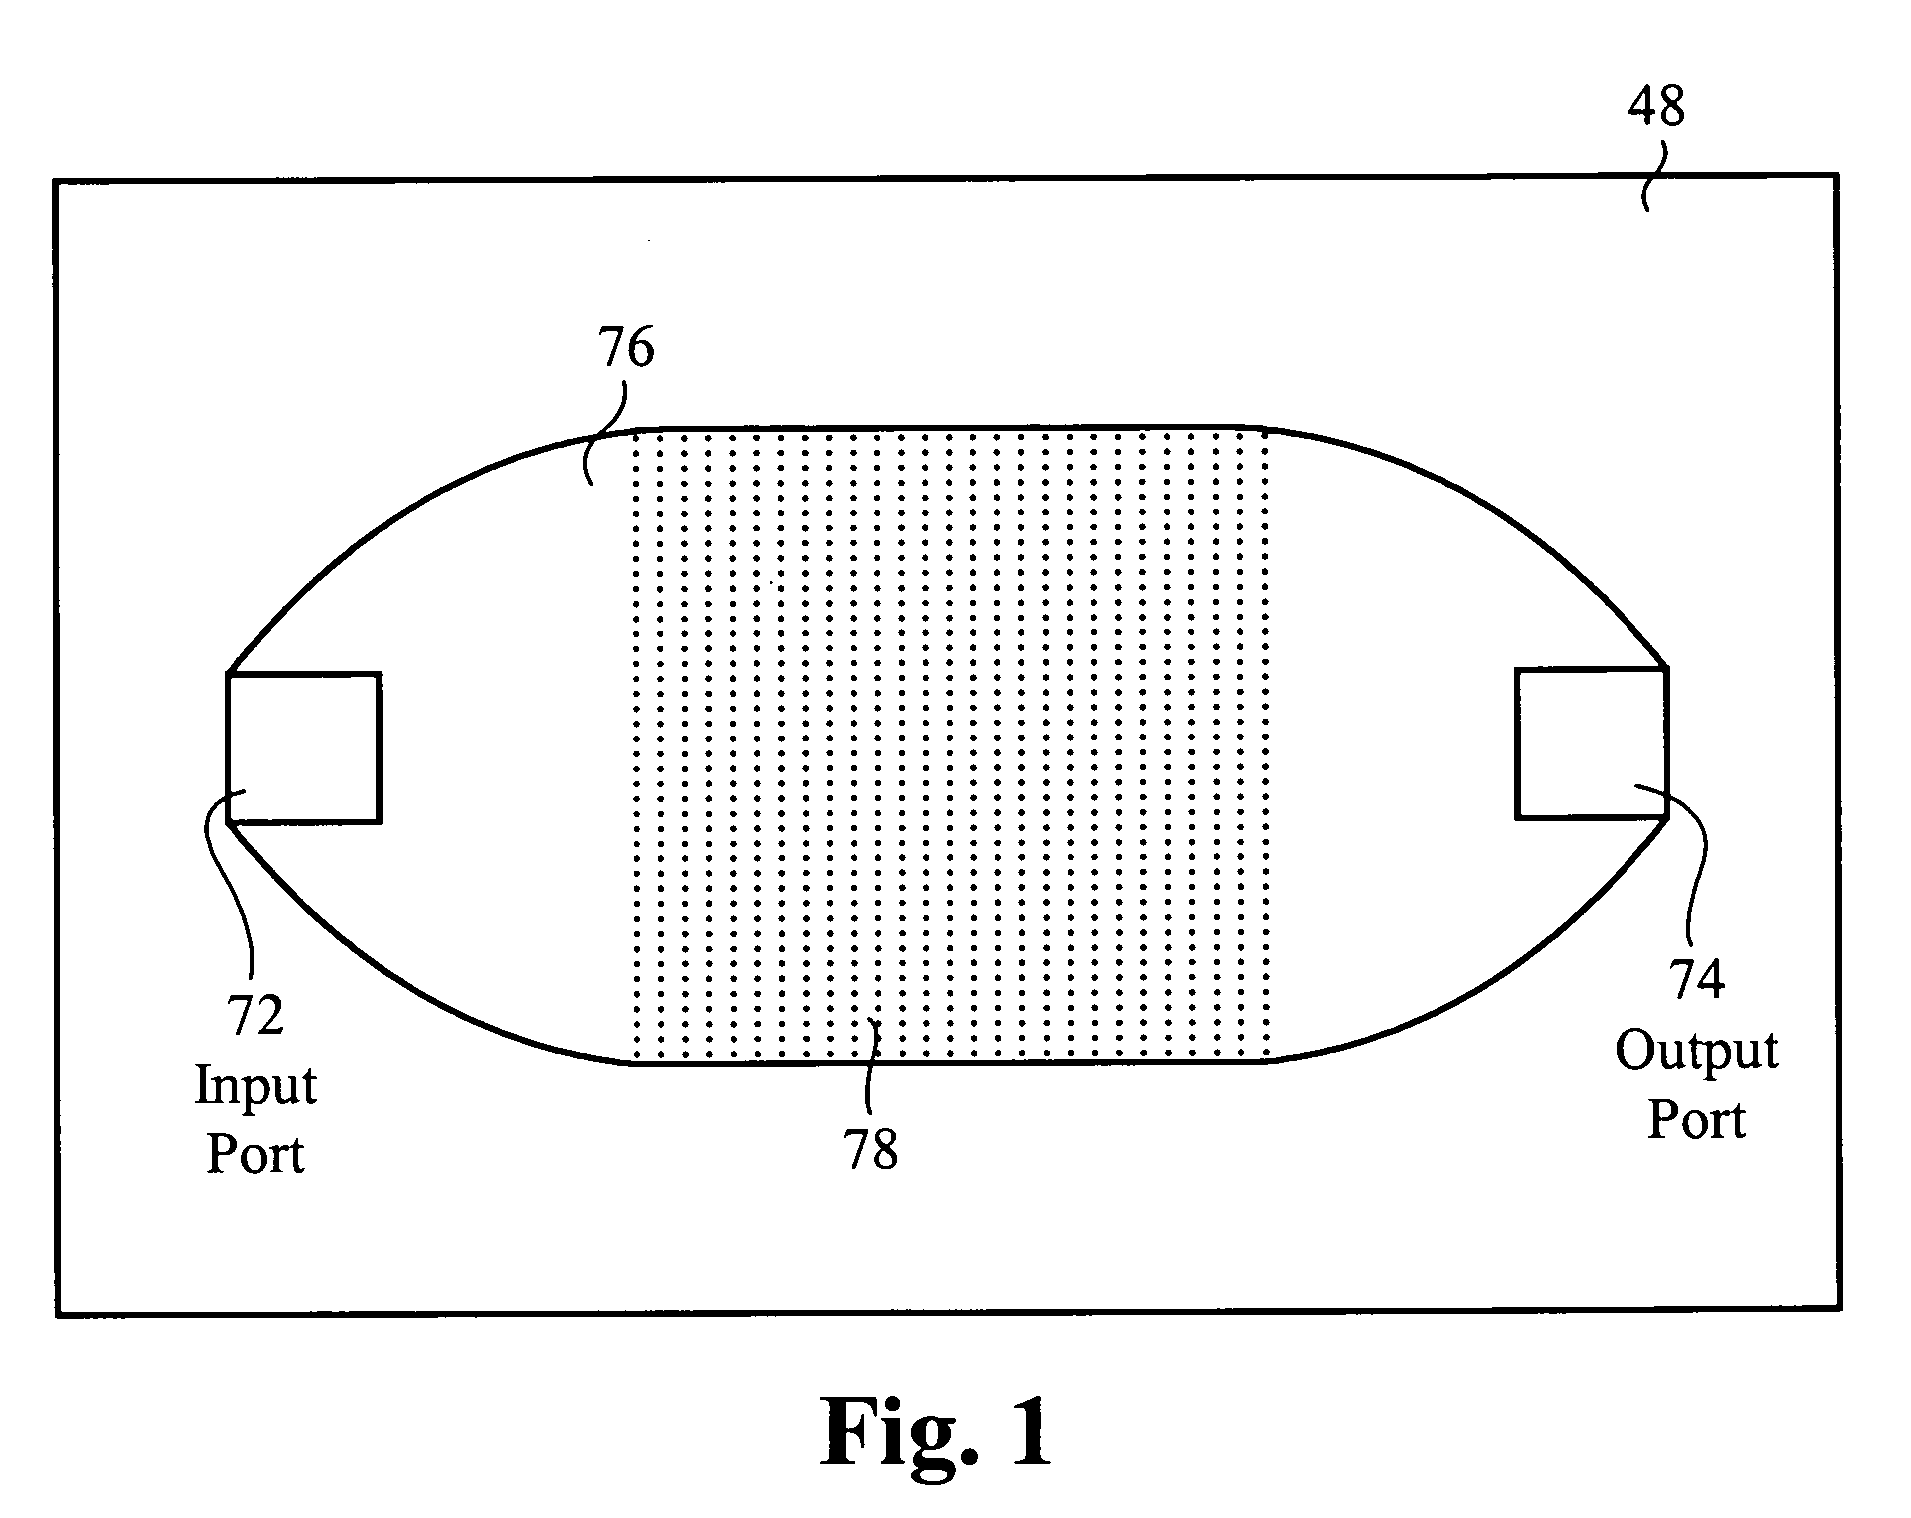 Apparatus and method of extracting and optically analyzing an analyte from a fluid-based sample